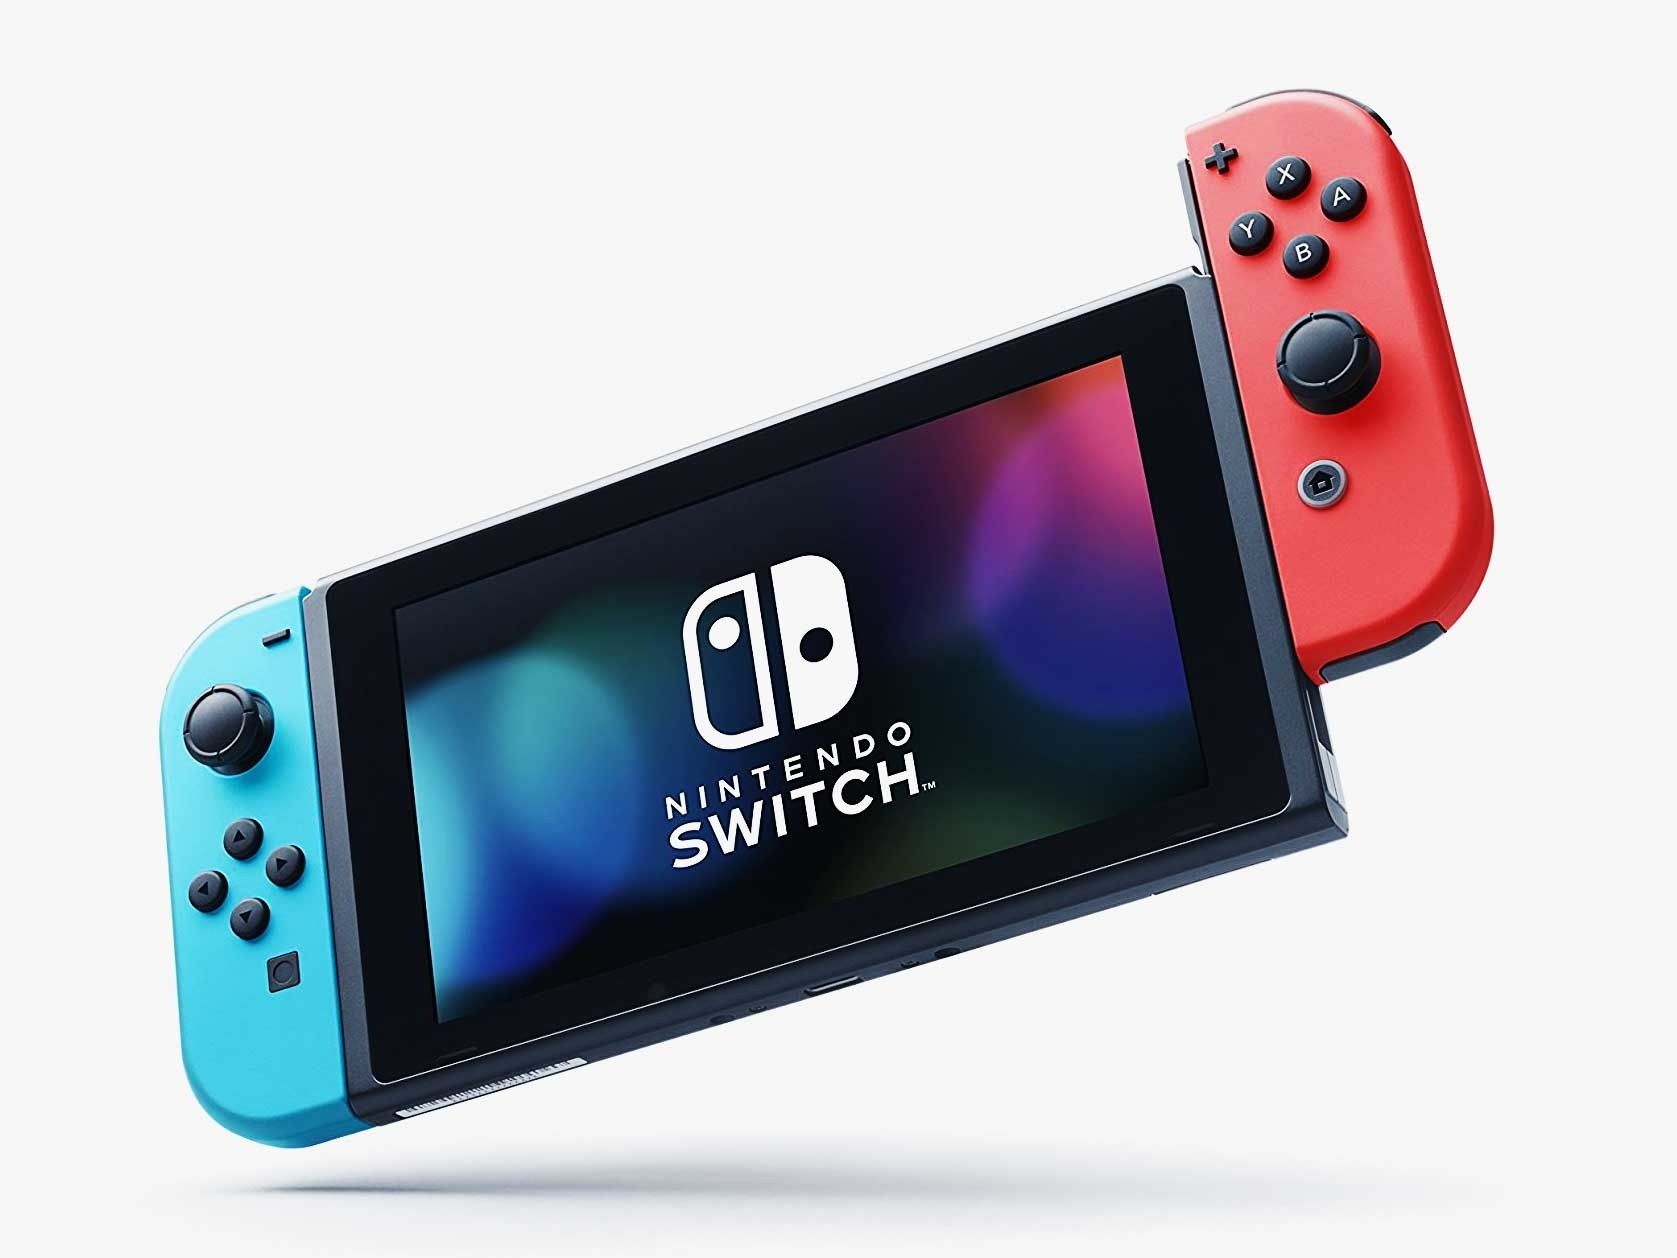 Would You Buy a Nintendo Switch Plus in 2020?